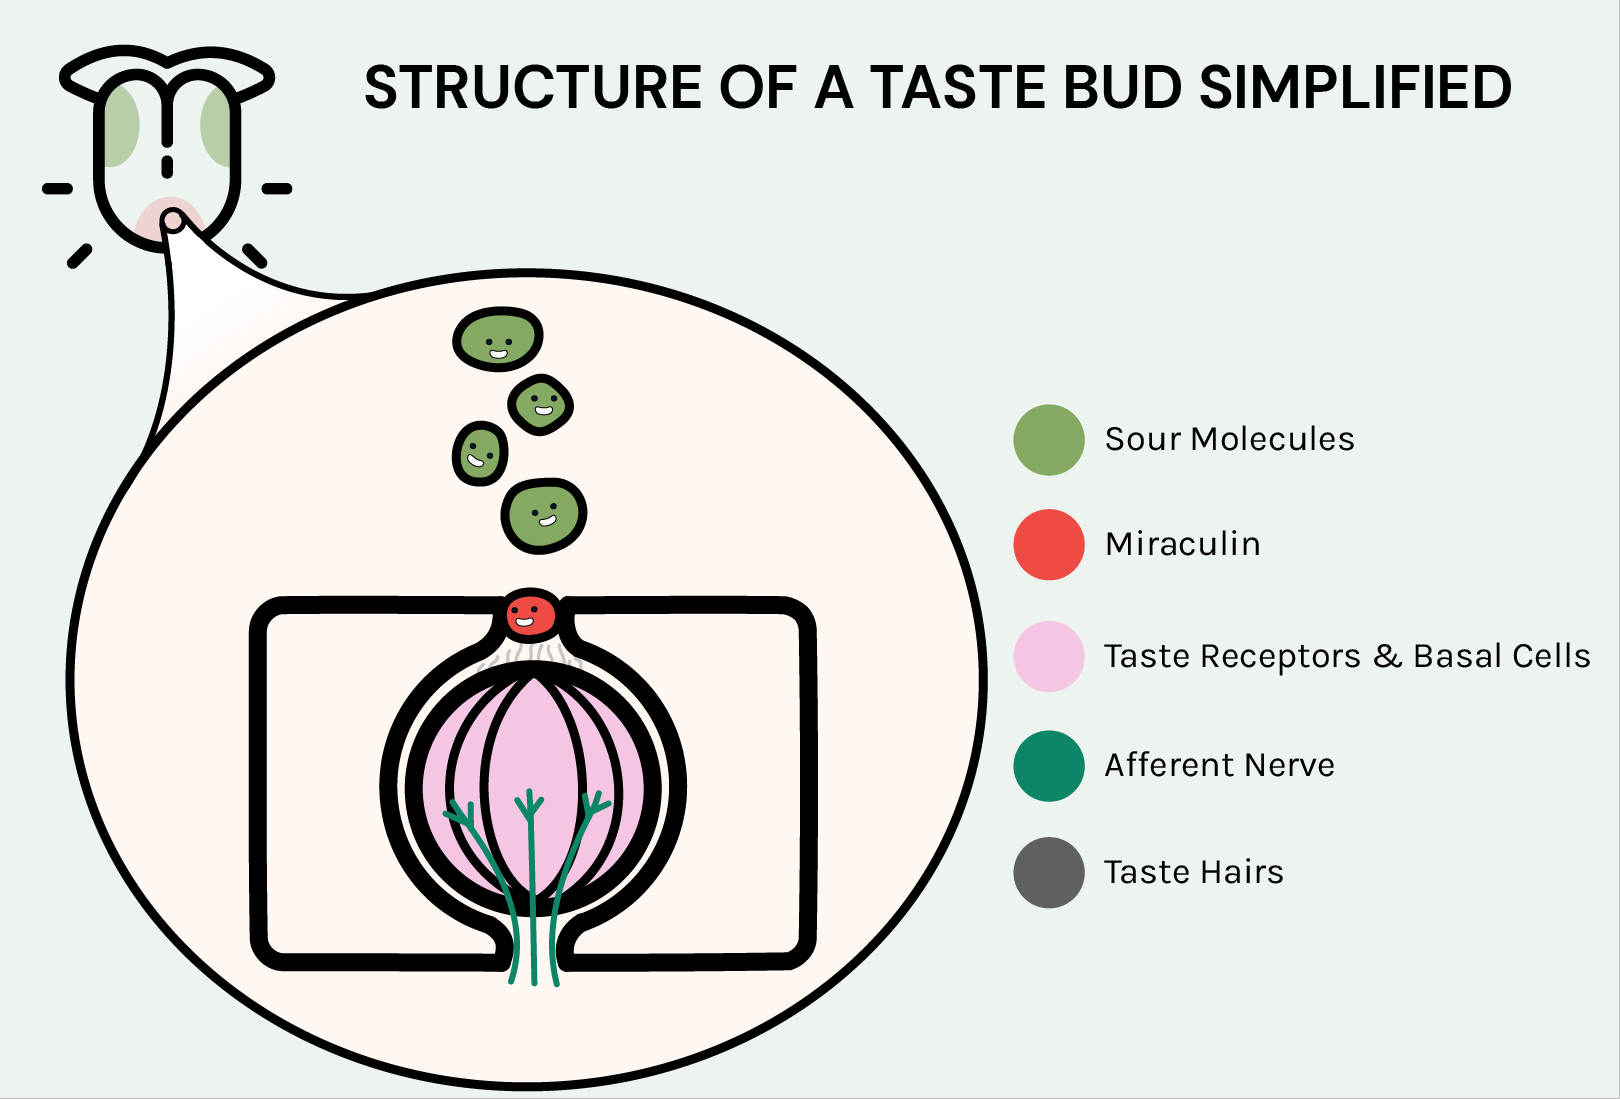 Are You a Super Taster? How Taste Impacts Your Appetite - CircleDNA